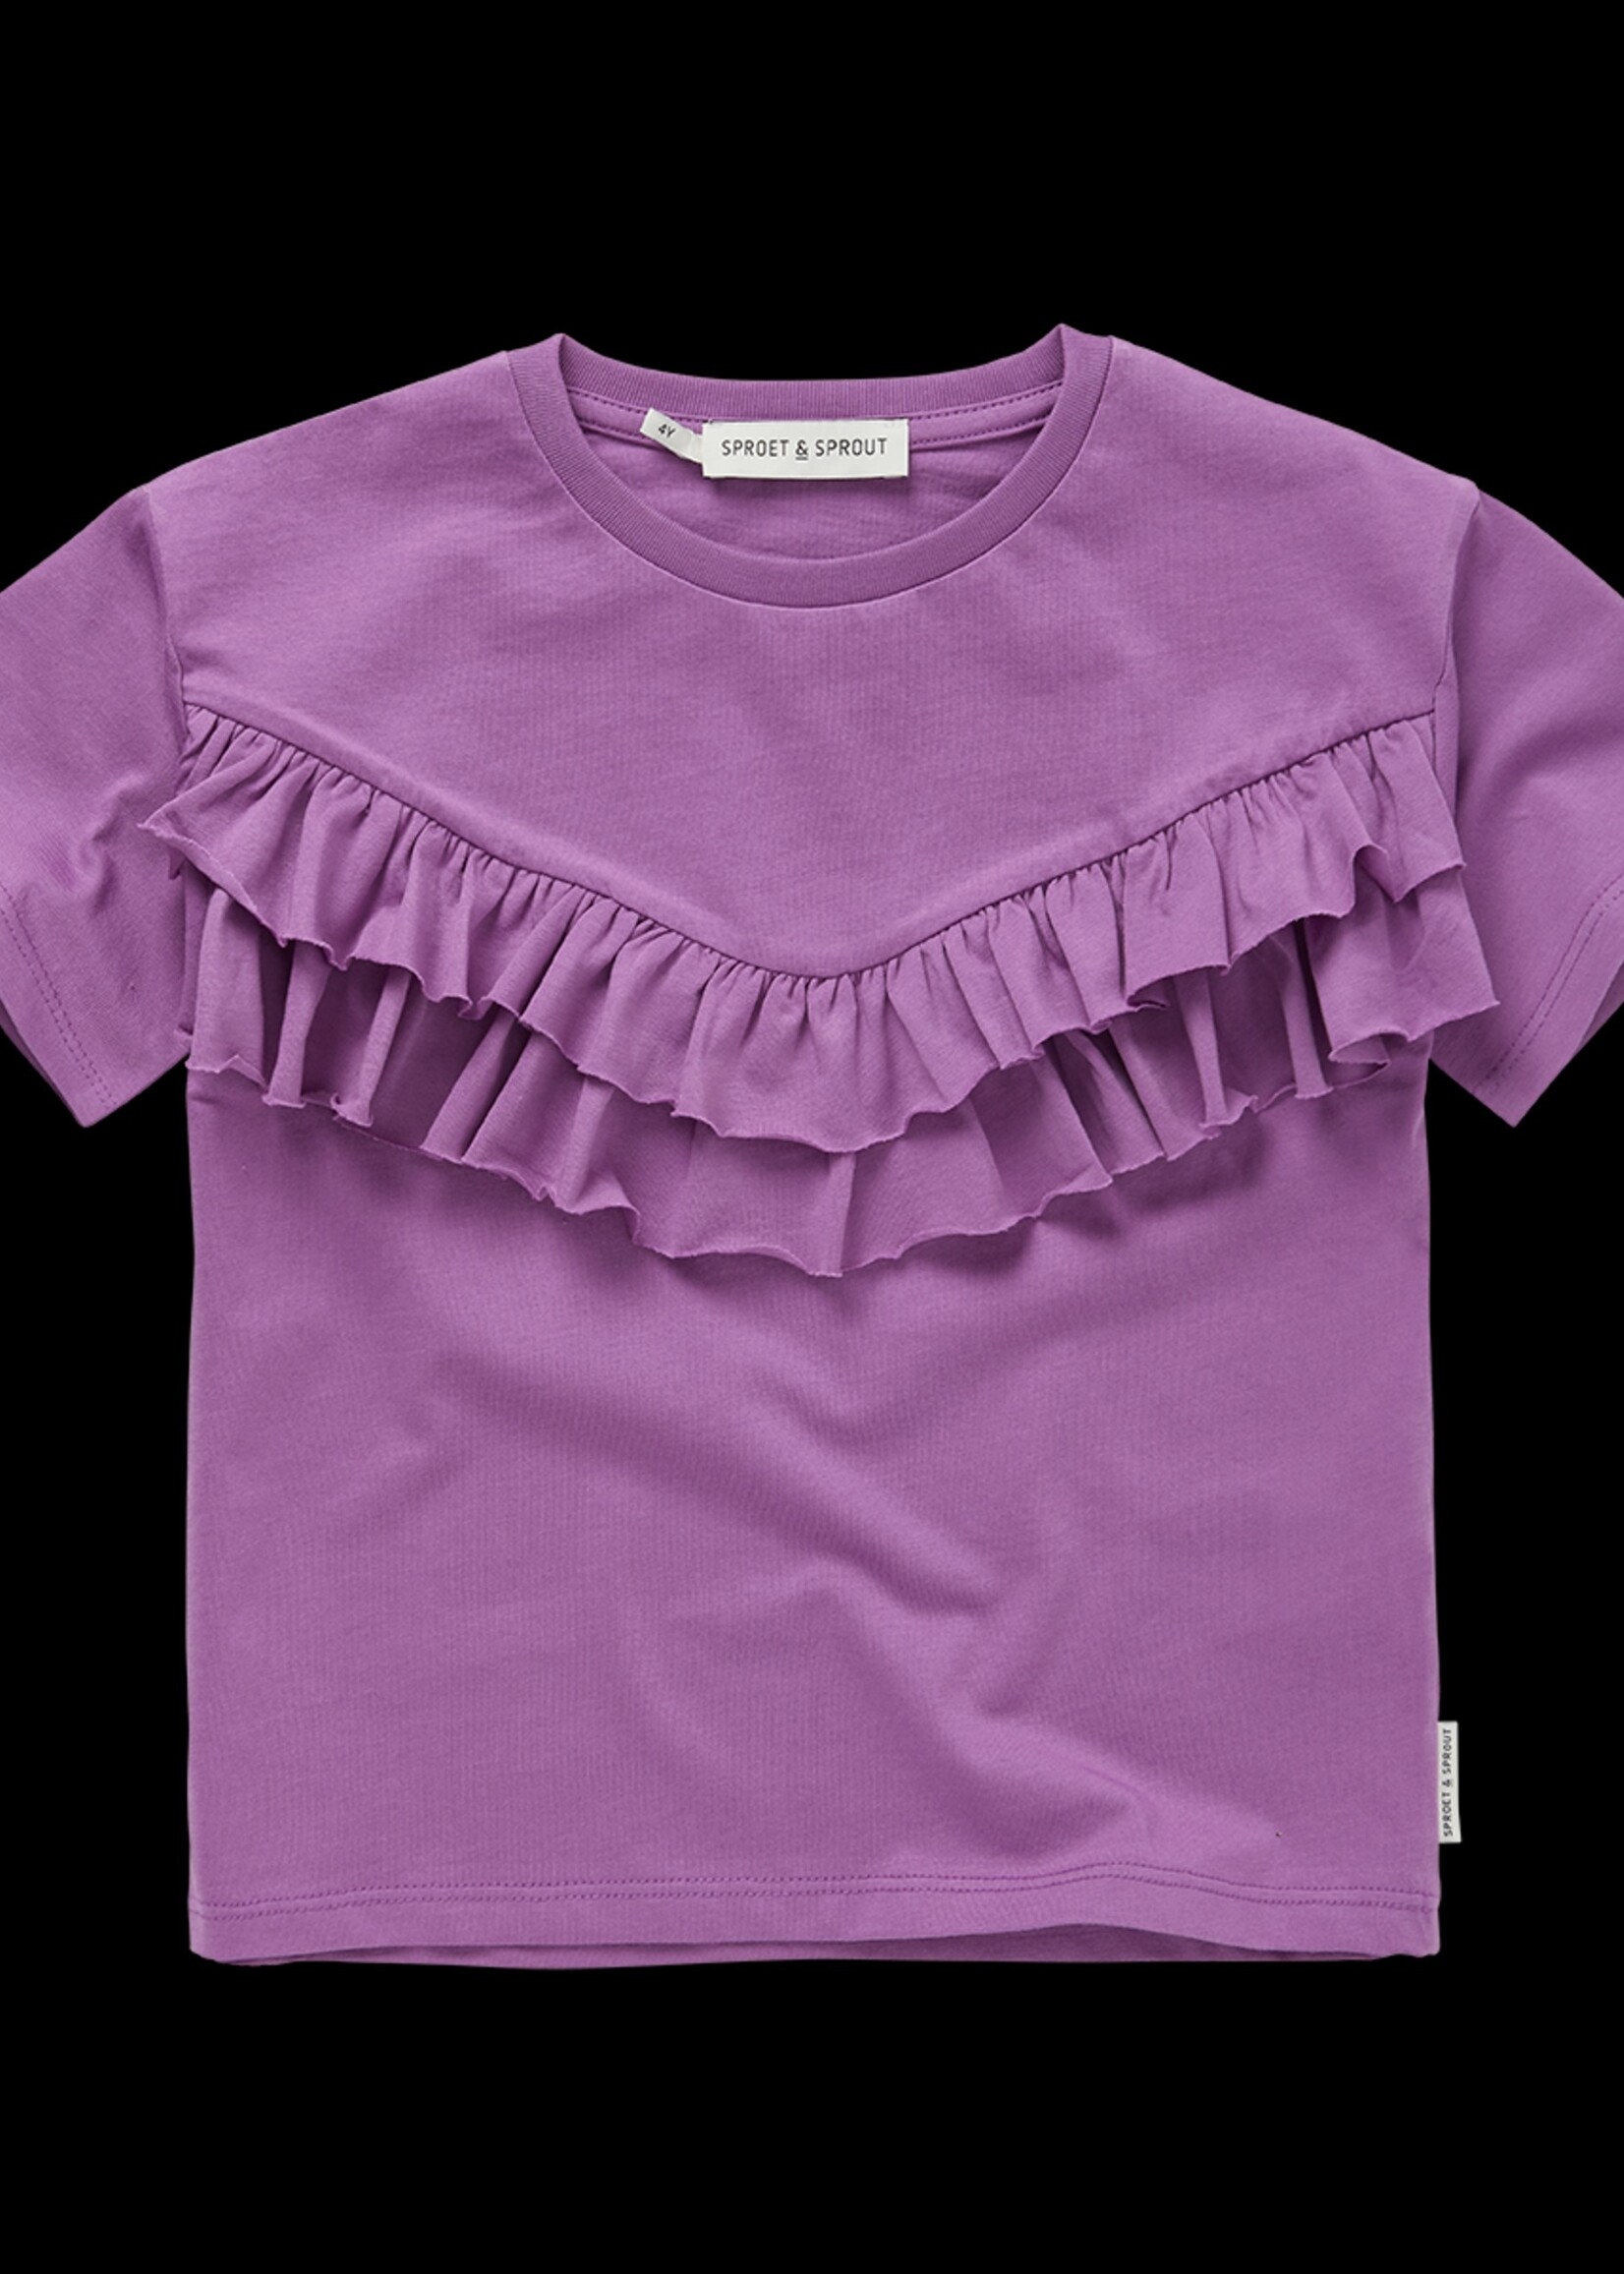 Sproet&Sprout Sproet&Sprout | T-shirt ruffle purple – Purple